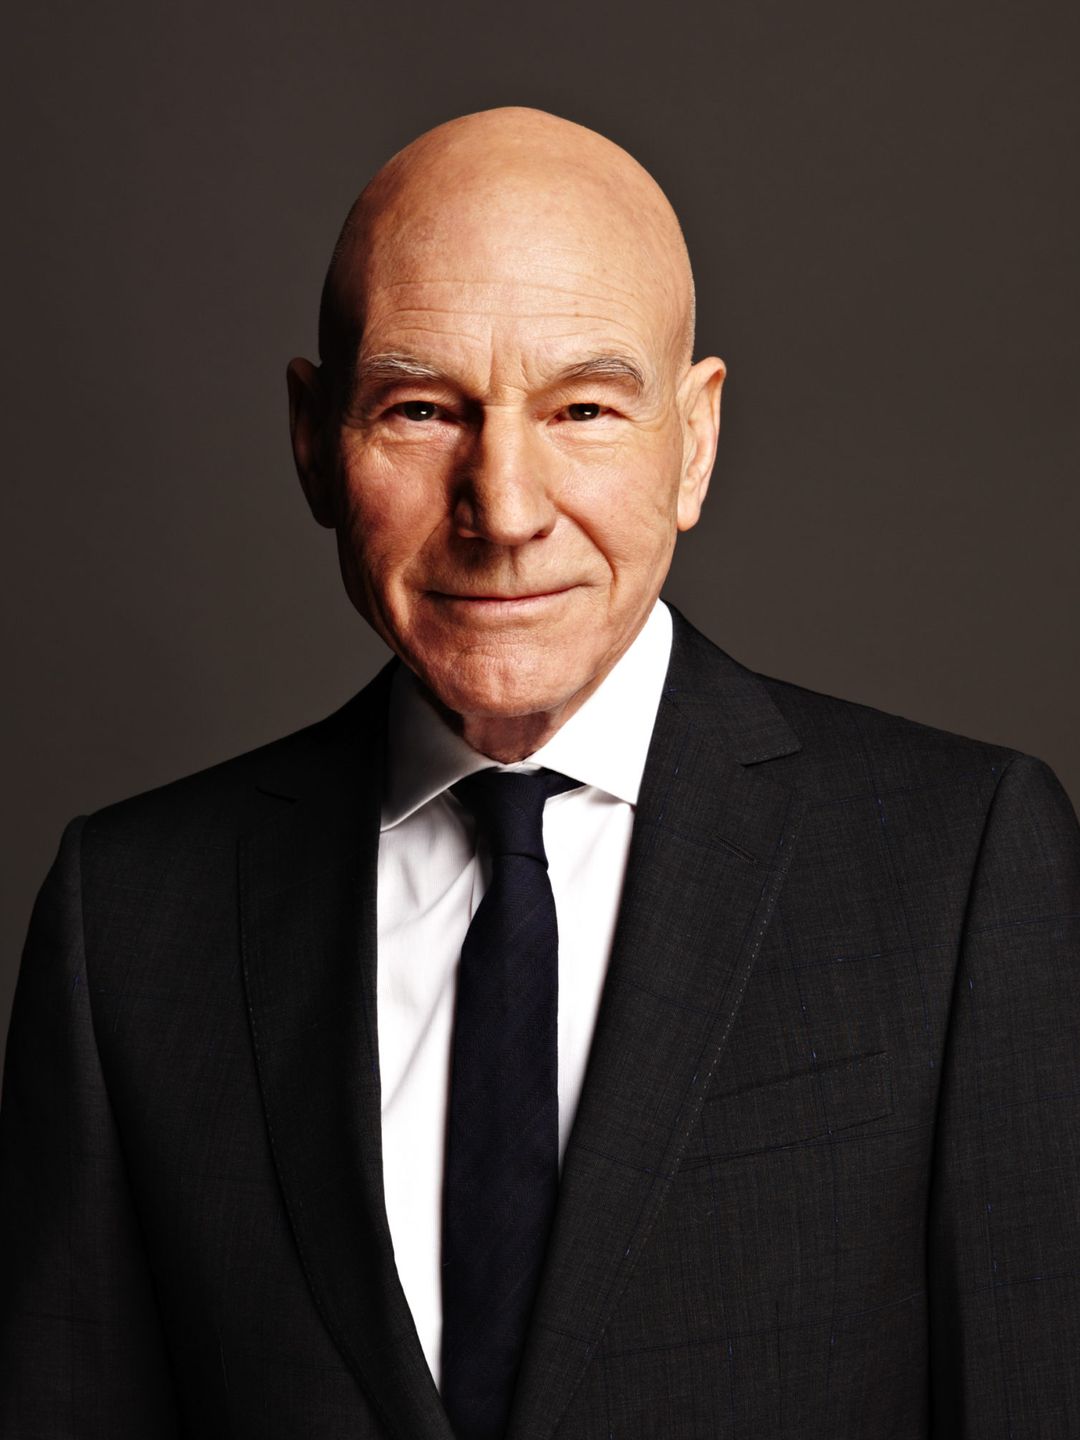 Patrick Stewart where is he now